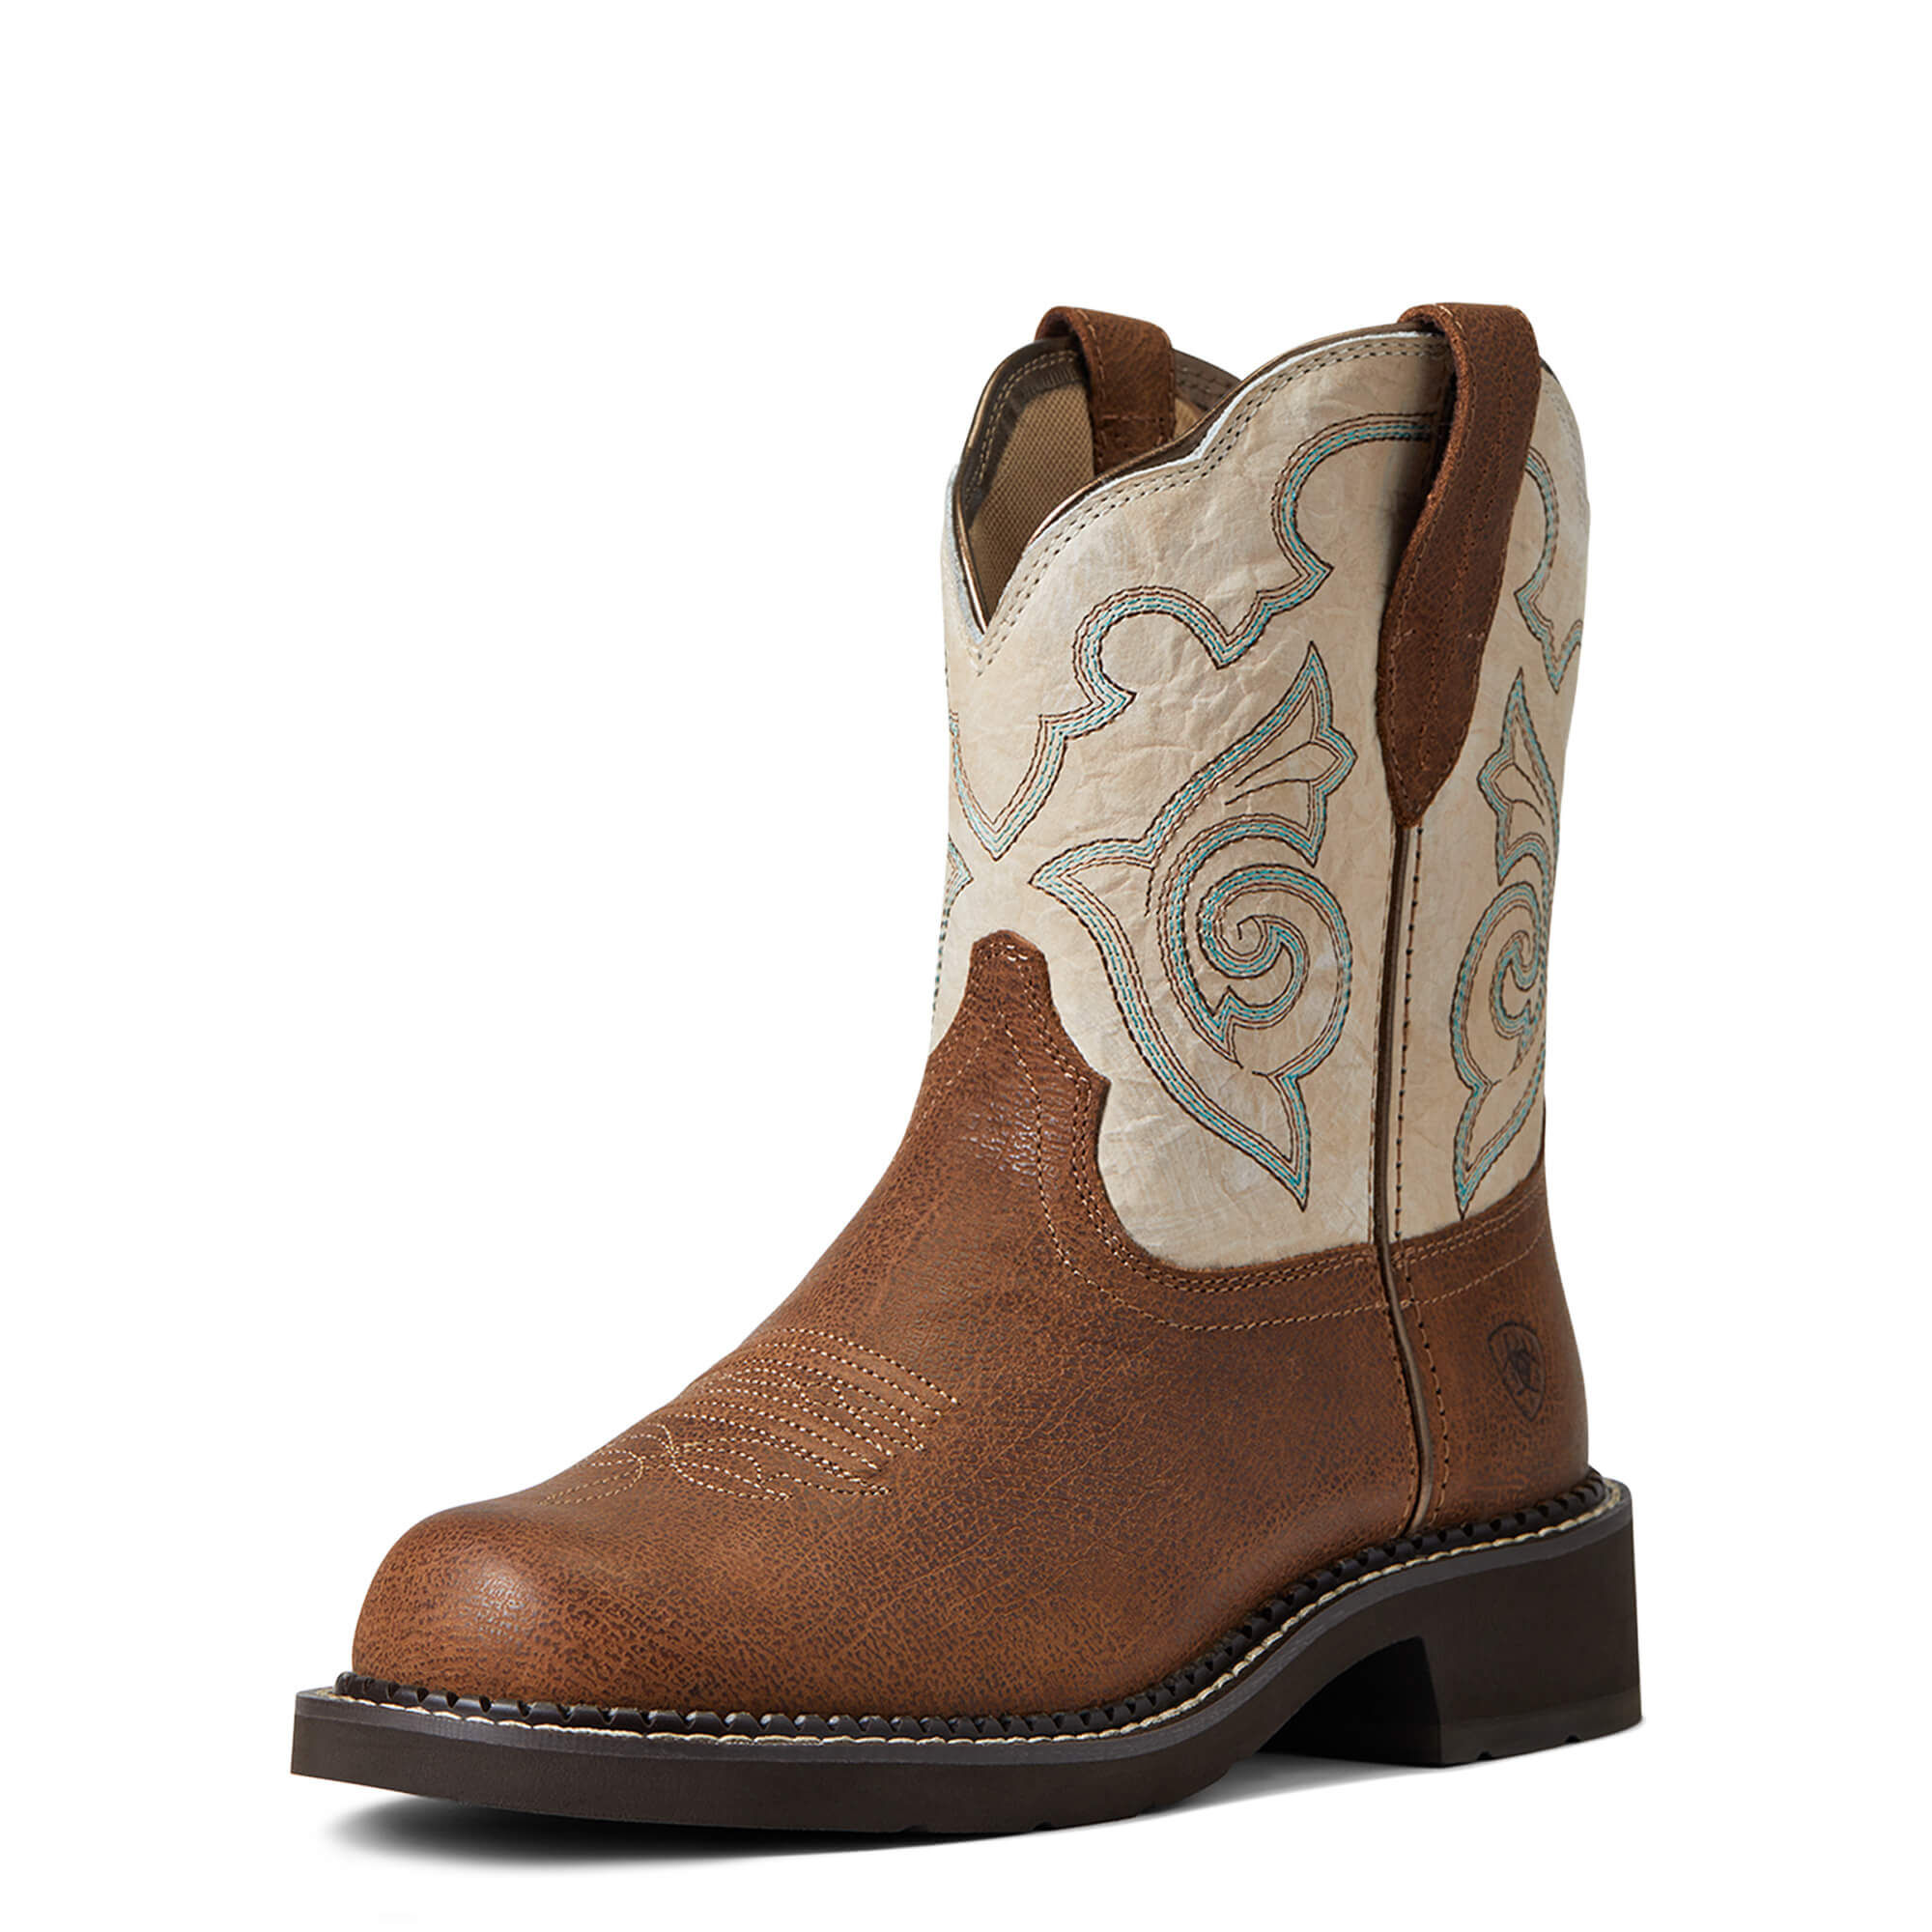 Picture of Ariat Fatbaby women's cowboy boots.